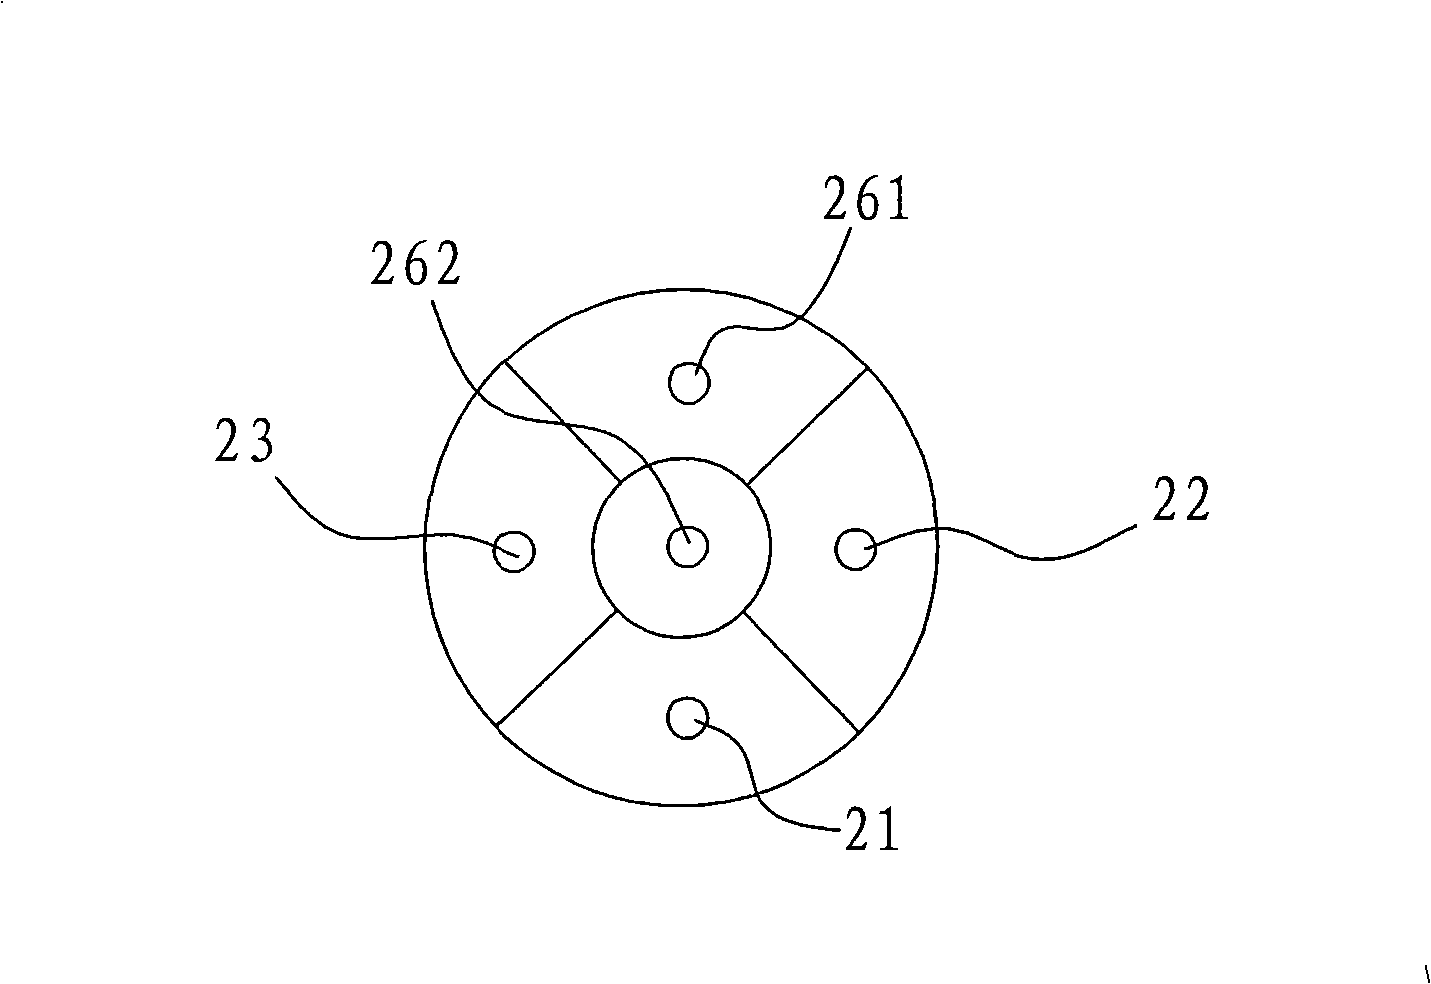 Equipment for treating relaxation of anal sphincter with trace radio frequency electrode